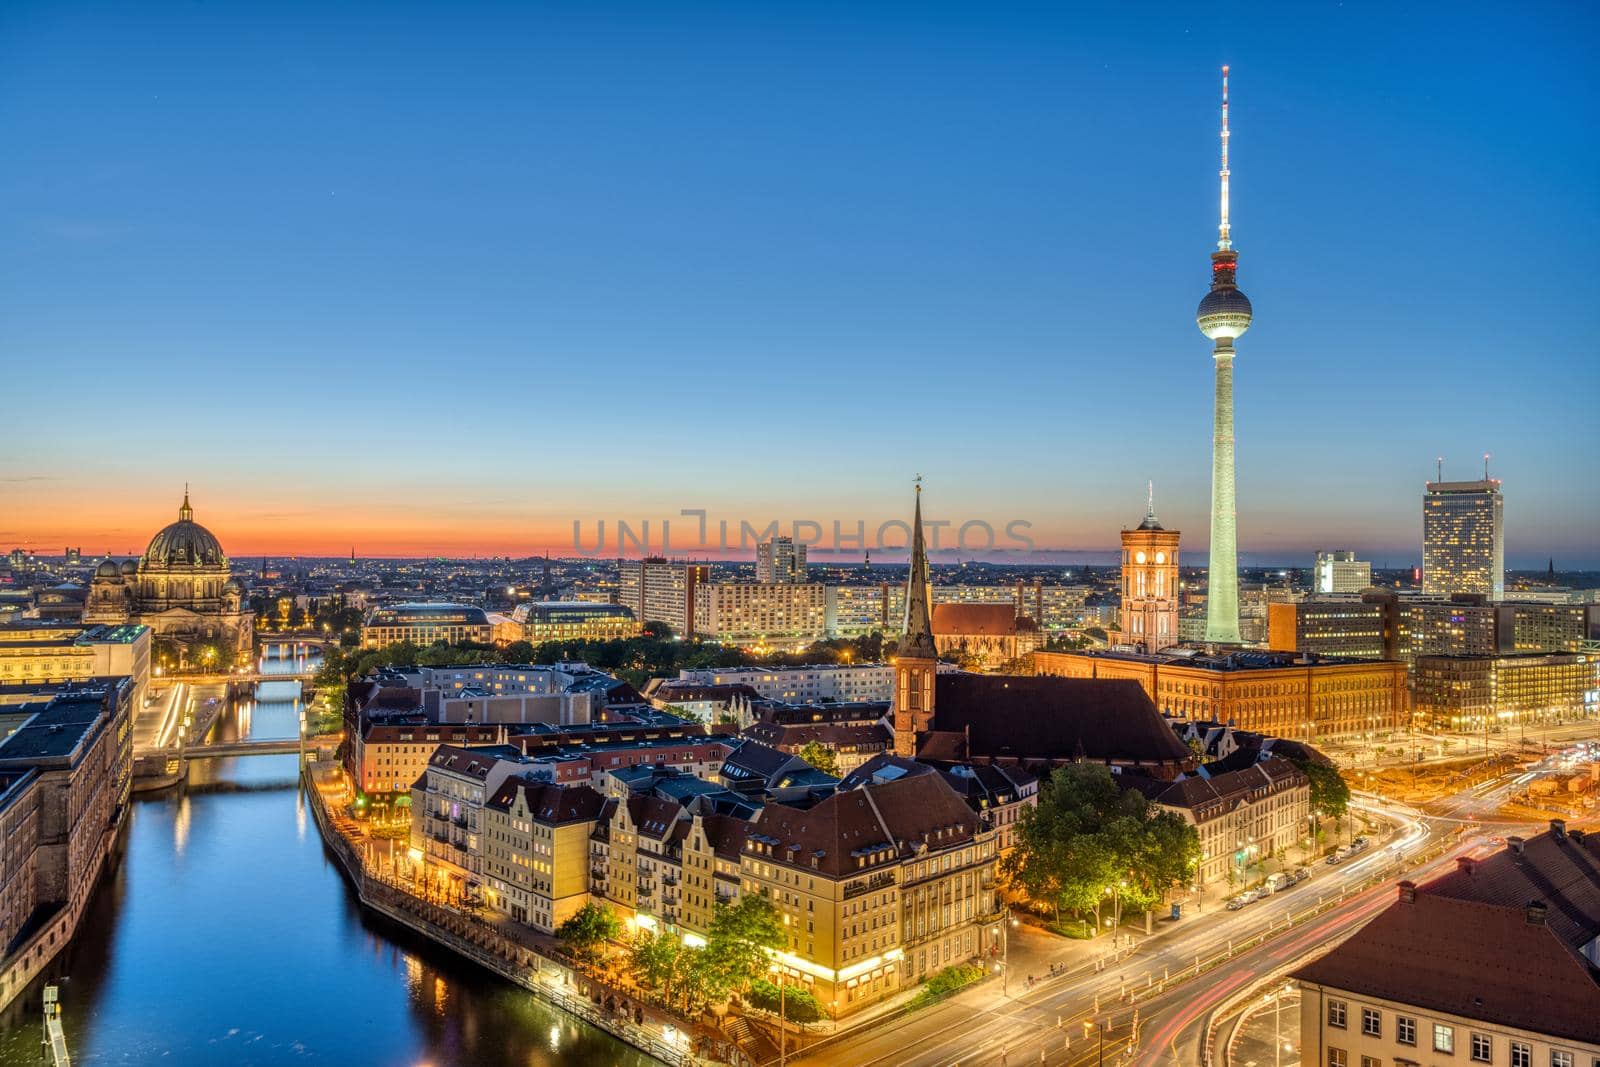 Downtown Berlin at dusk with the TV Tower, the river Spree and the cathedral